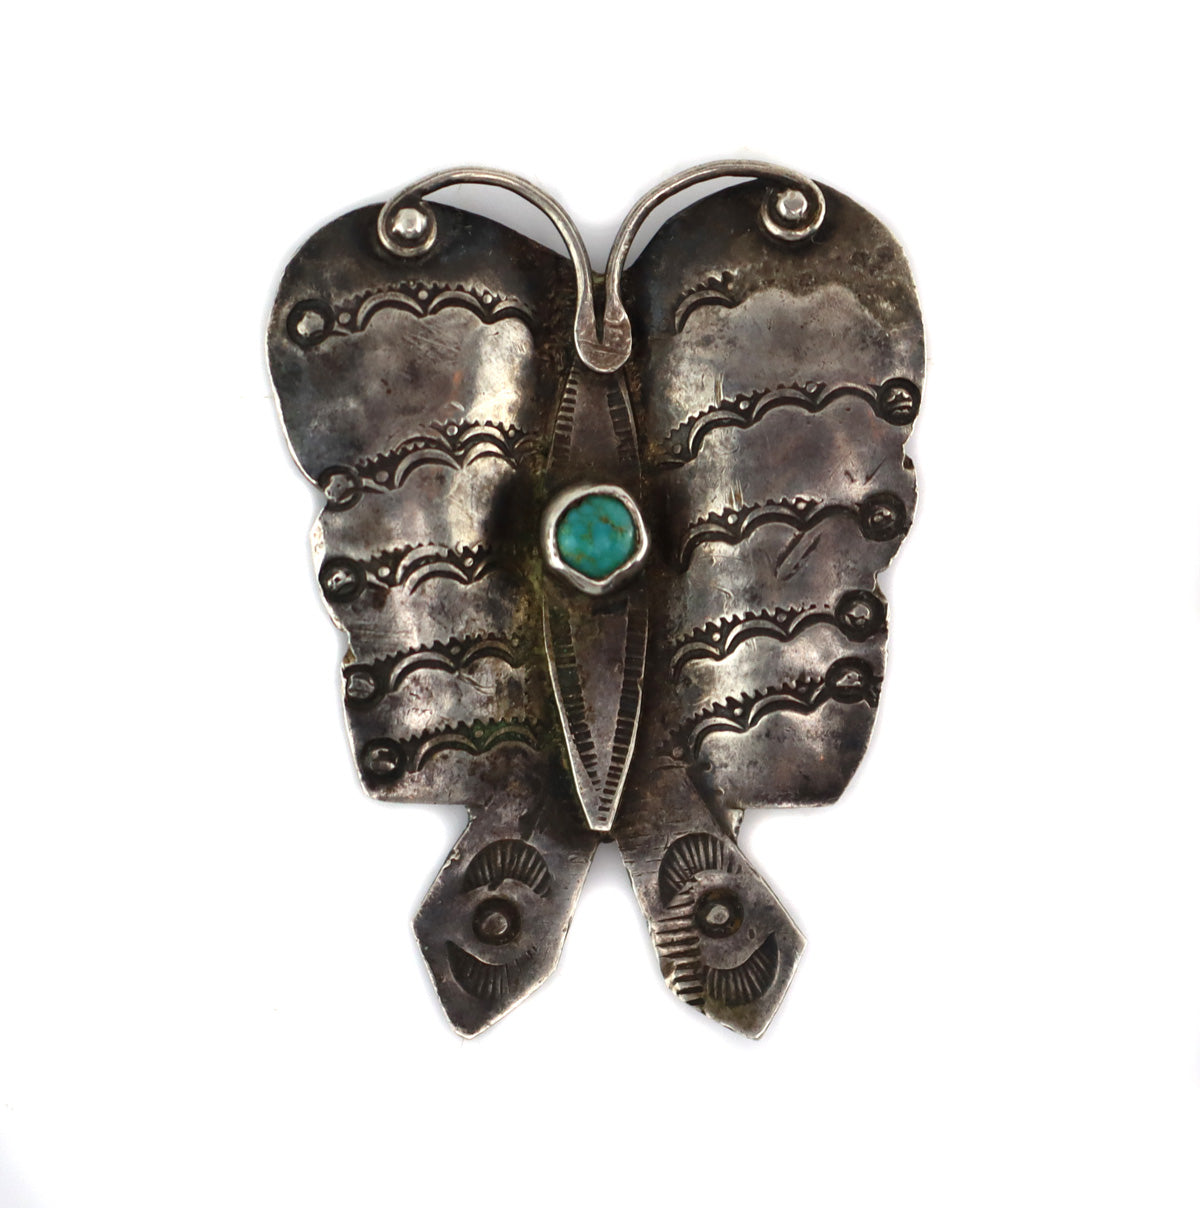 Navajo - Turquoise and Silver Butterfly Pin with Stamped Design c. 1930s, 1.75" x 1.25"